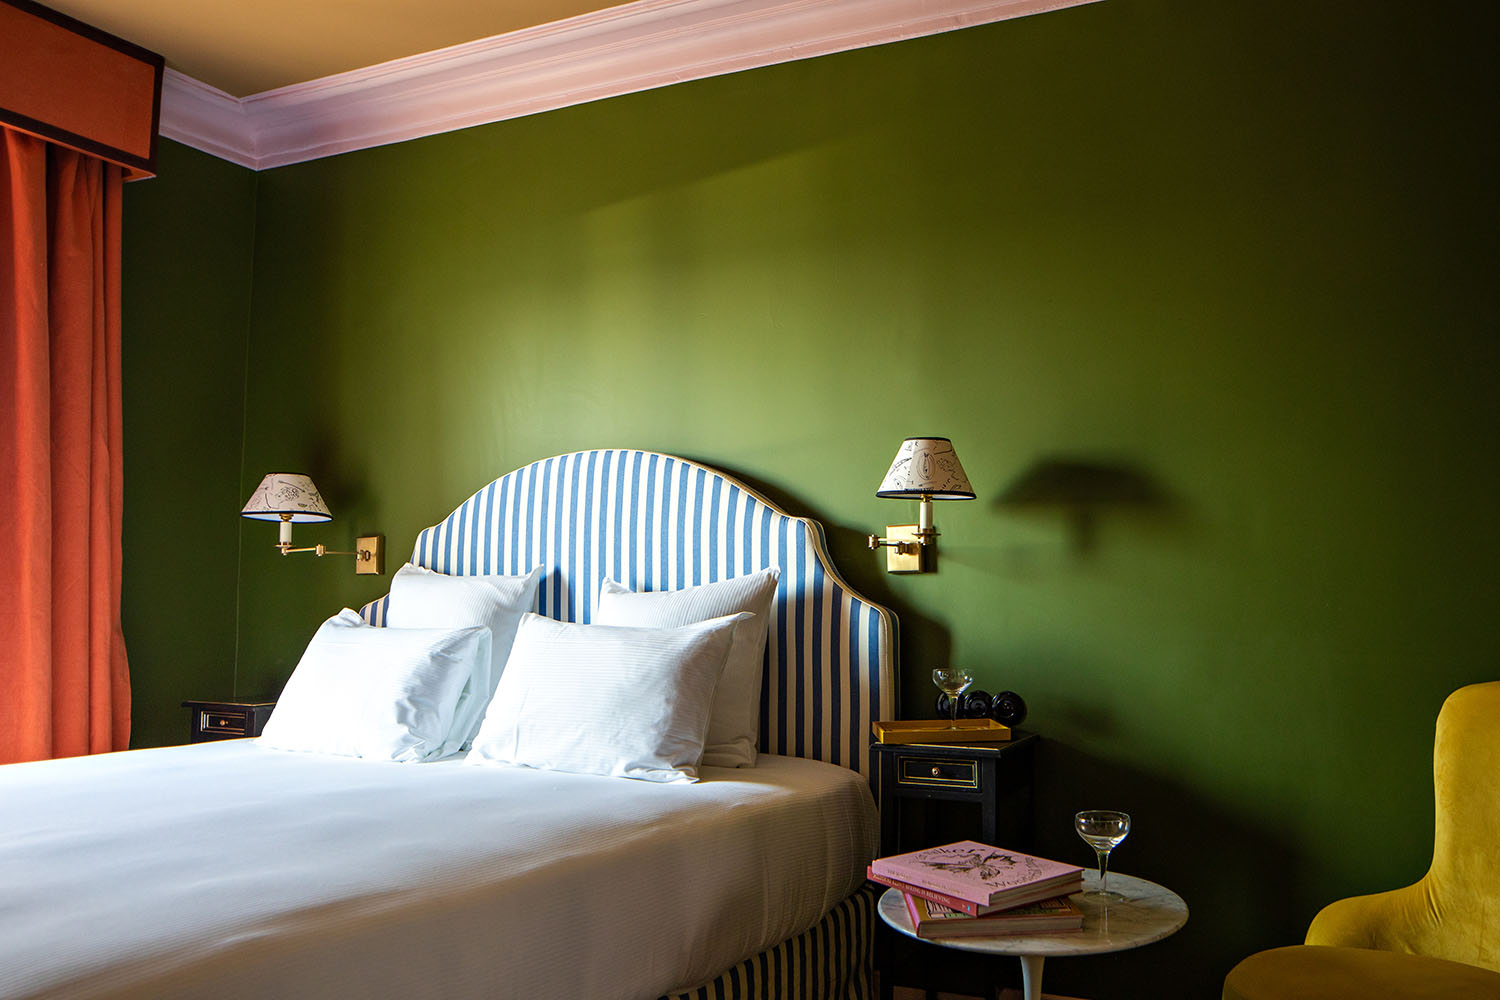 An olive green guest room at Hotel les Deux Gares with a blue and white striped headboard, mural-sketched wall lamp shades, a mustard velvet arm chair and a small white marble side table